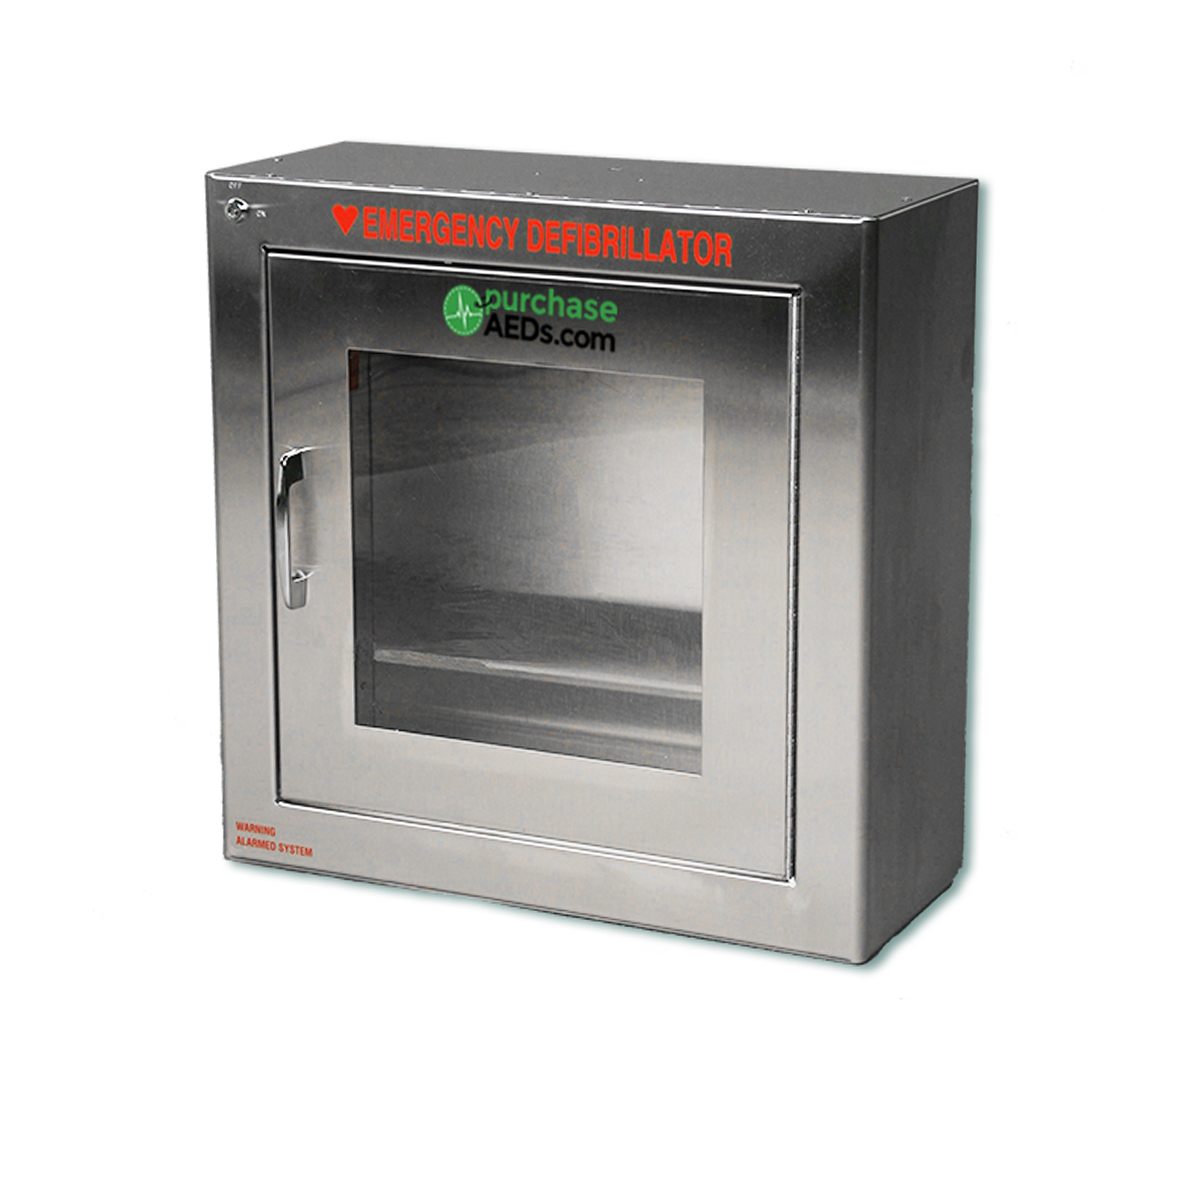 Stainless Steel Deluxe Alarmed AED Cabinet PurchaseAEDs.com 